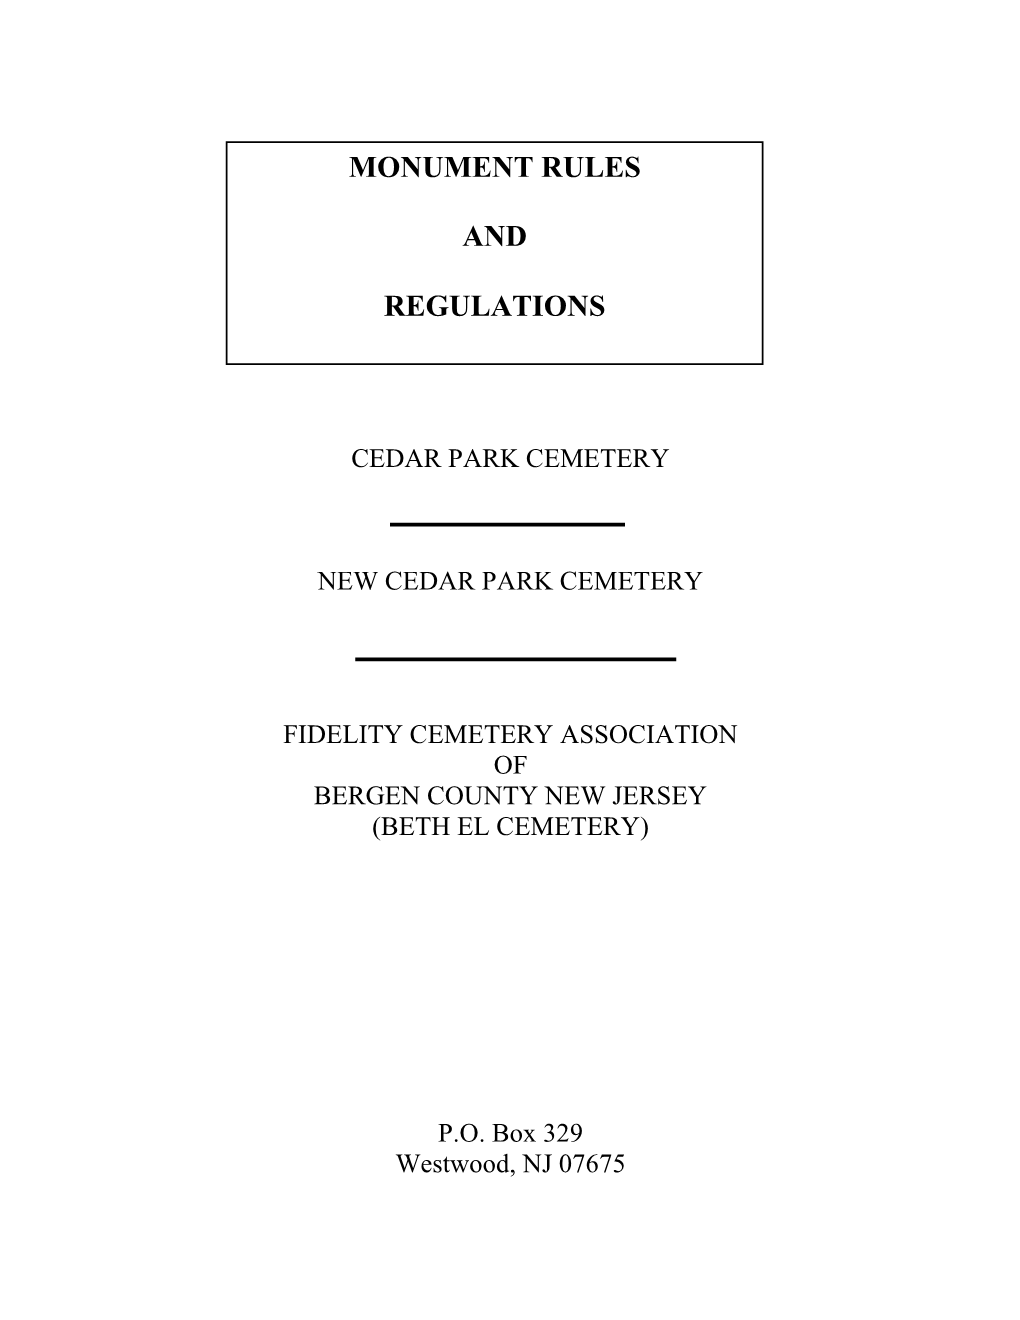 Monument Rules and Regulations